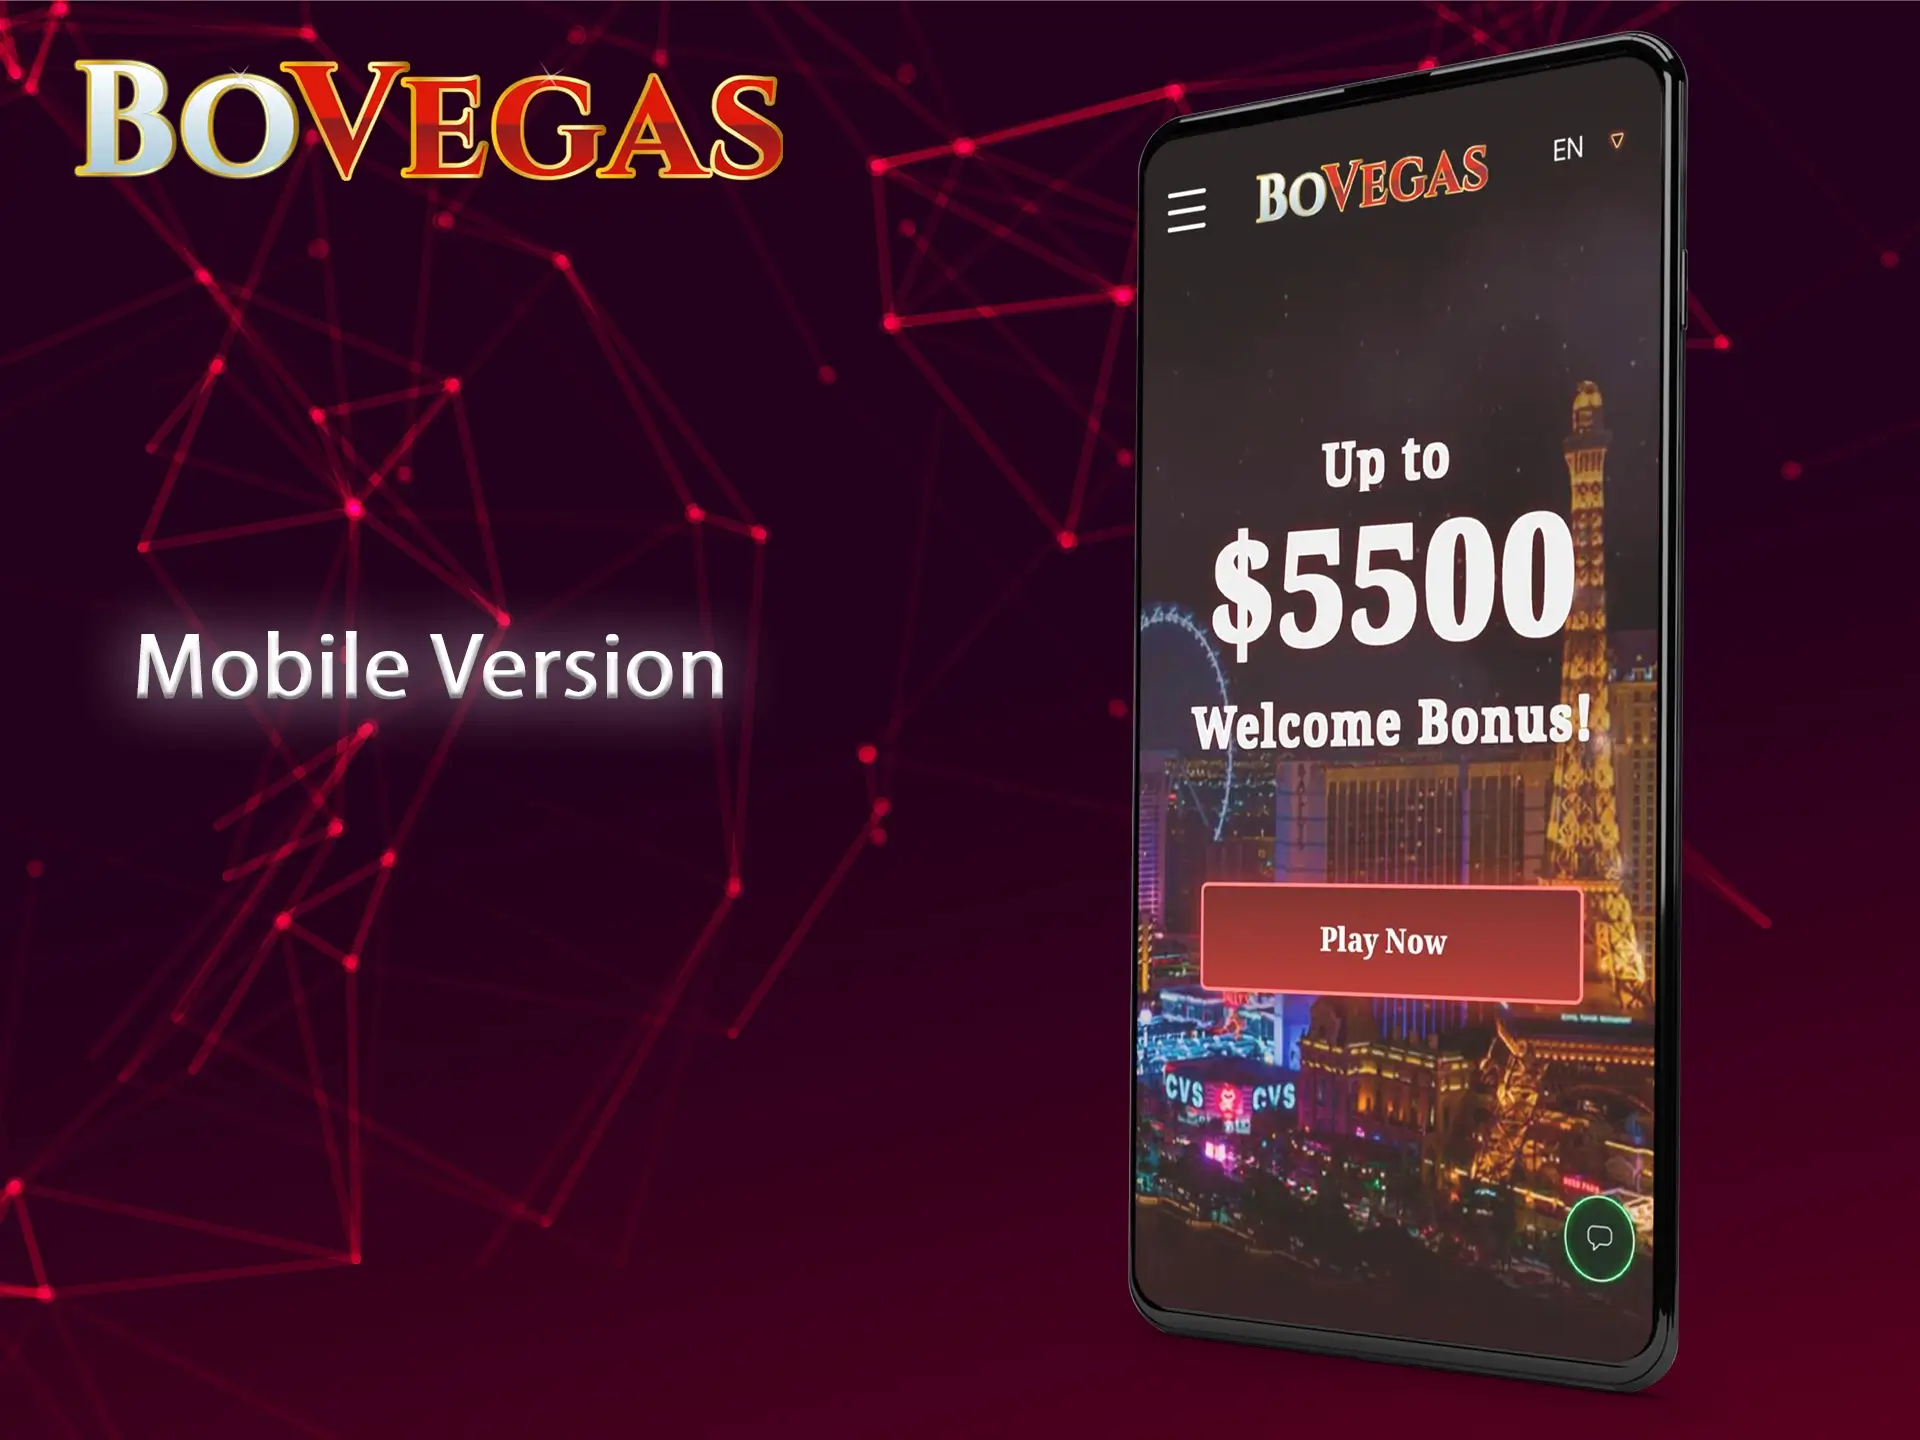 Use the mobile website version of BoVegas to place a bet on your device.